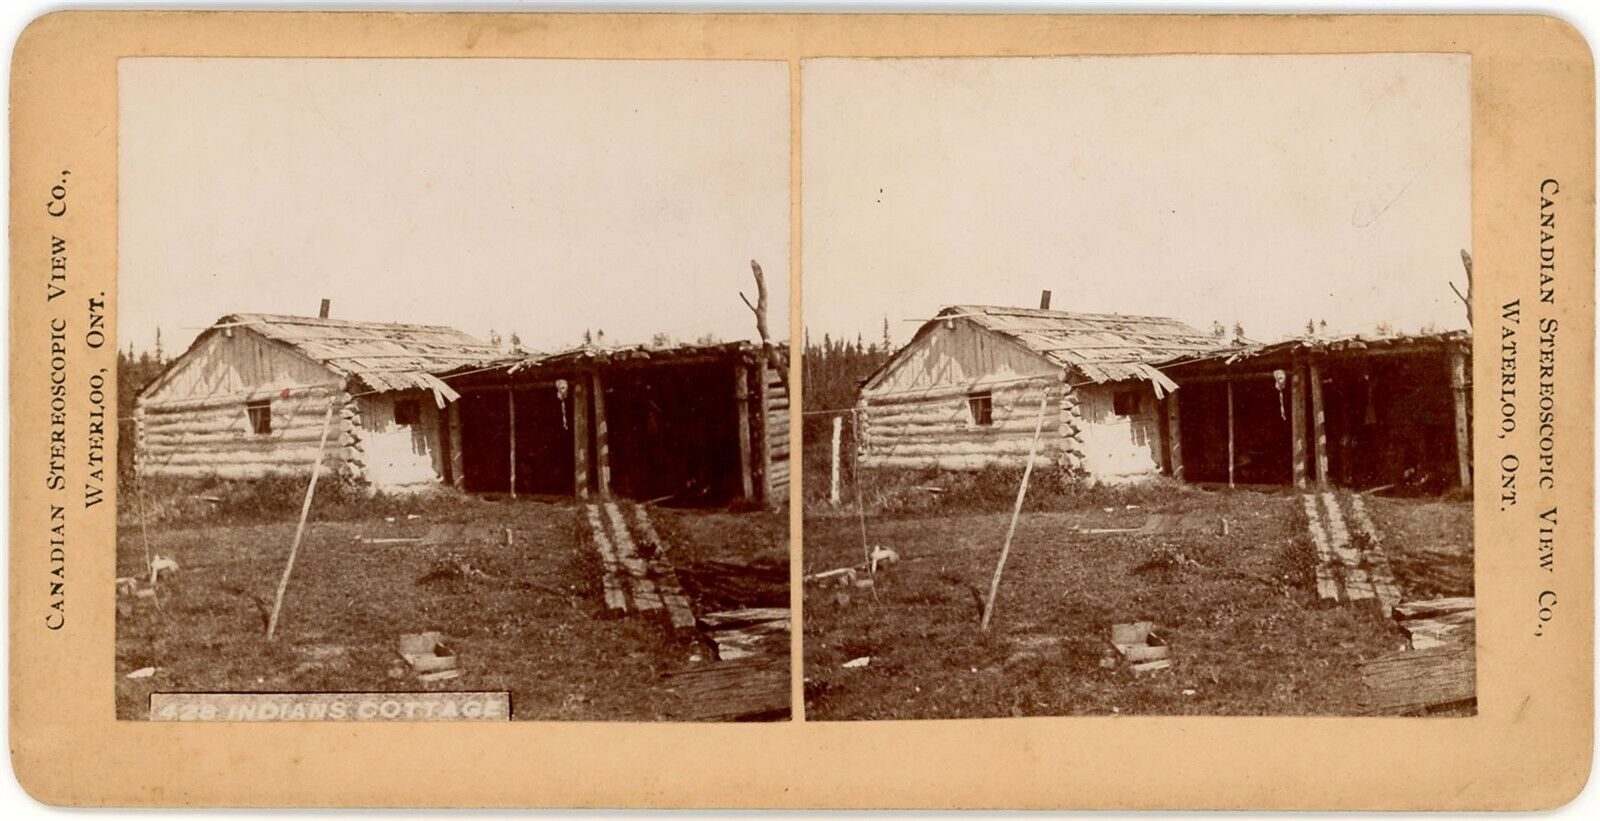 CANADA SV - Ontario - Temagami - First Nations Cottage - Canadian Stereo View Co